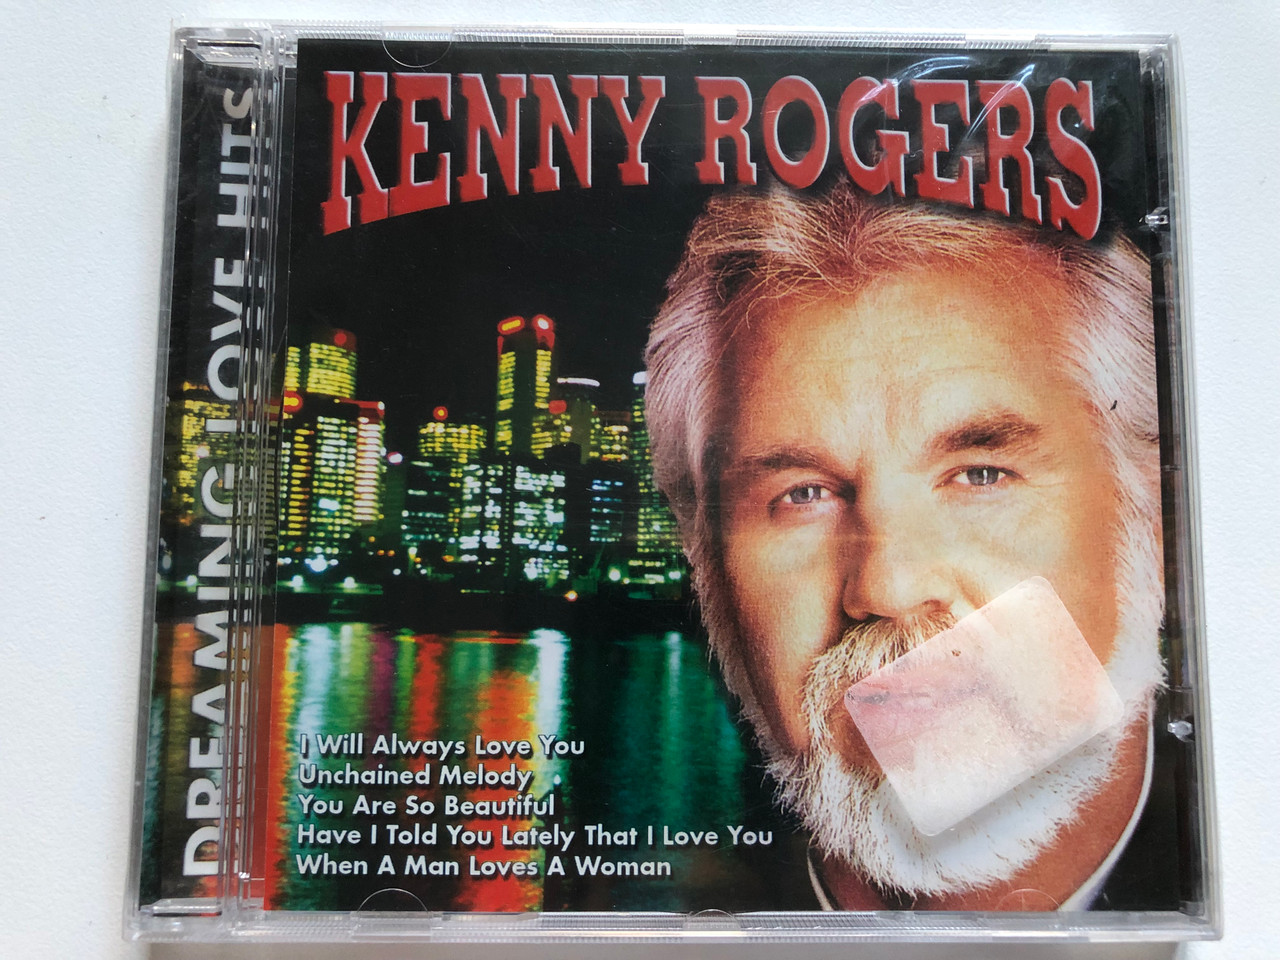 https://cdn10.bigcommerce.com/s-62bdpkt7pb/products/0/images/228246/Kenny_Rogers_Dreaming_Love_Hits_I_Will_Always_Love_You_Unchained_Melody_You_Are_So_Beautiful_Have_I_Told_You_Lately_That_I_Love_You_When_A_Man_Loves_A_Woman_Eurotrend_Audio_CD_CD_152_1__56201.1653061467.1280.1280.JPG?c=2&_gl=1*1pl3jaf*_ga*MjA2NTIxMjE2MC4xNTkwNTEyNTMy*_ga_WS2VZYPC6G*MTY1MzA1NDg0MC40MDUuMS4xNjUzMDYxMzM1LjQy